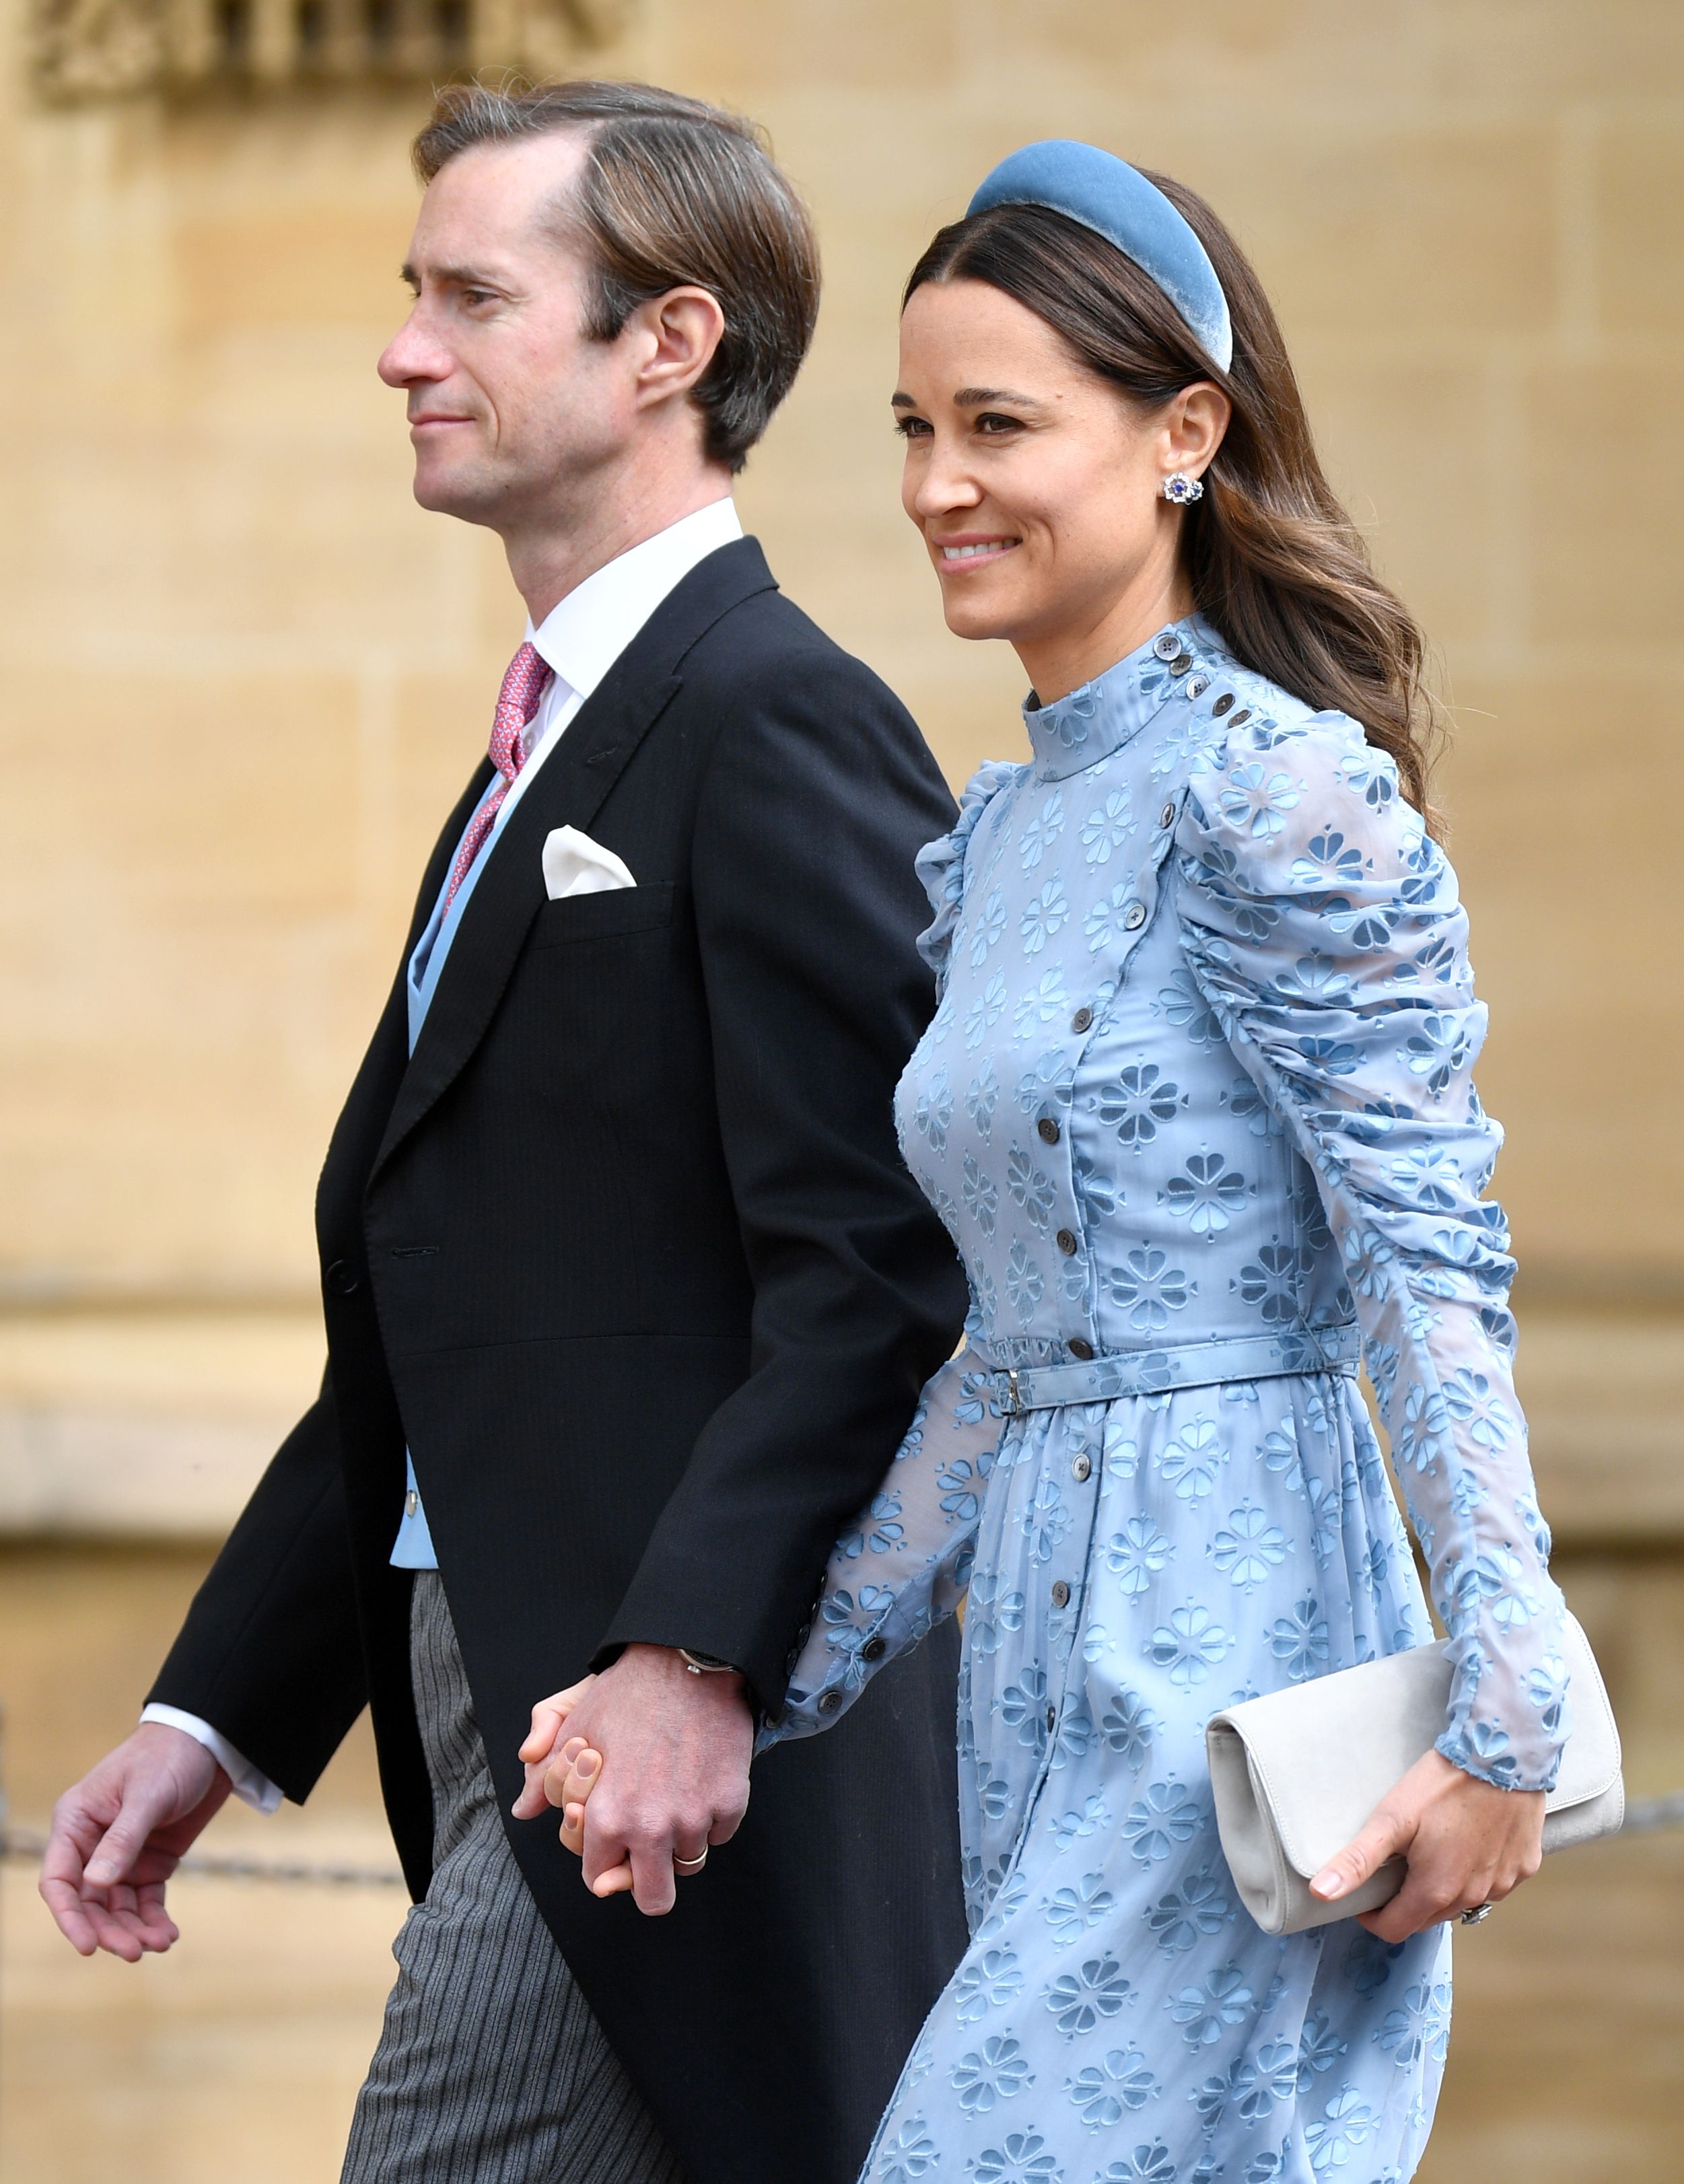 James Matthews and Pippa Middleton at the wedding of Lady Gabriella Windsor and Thomas Kingston at St George's Chapel on May 18, 2019 | Photo: Getty Images